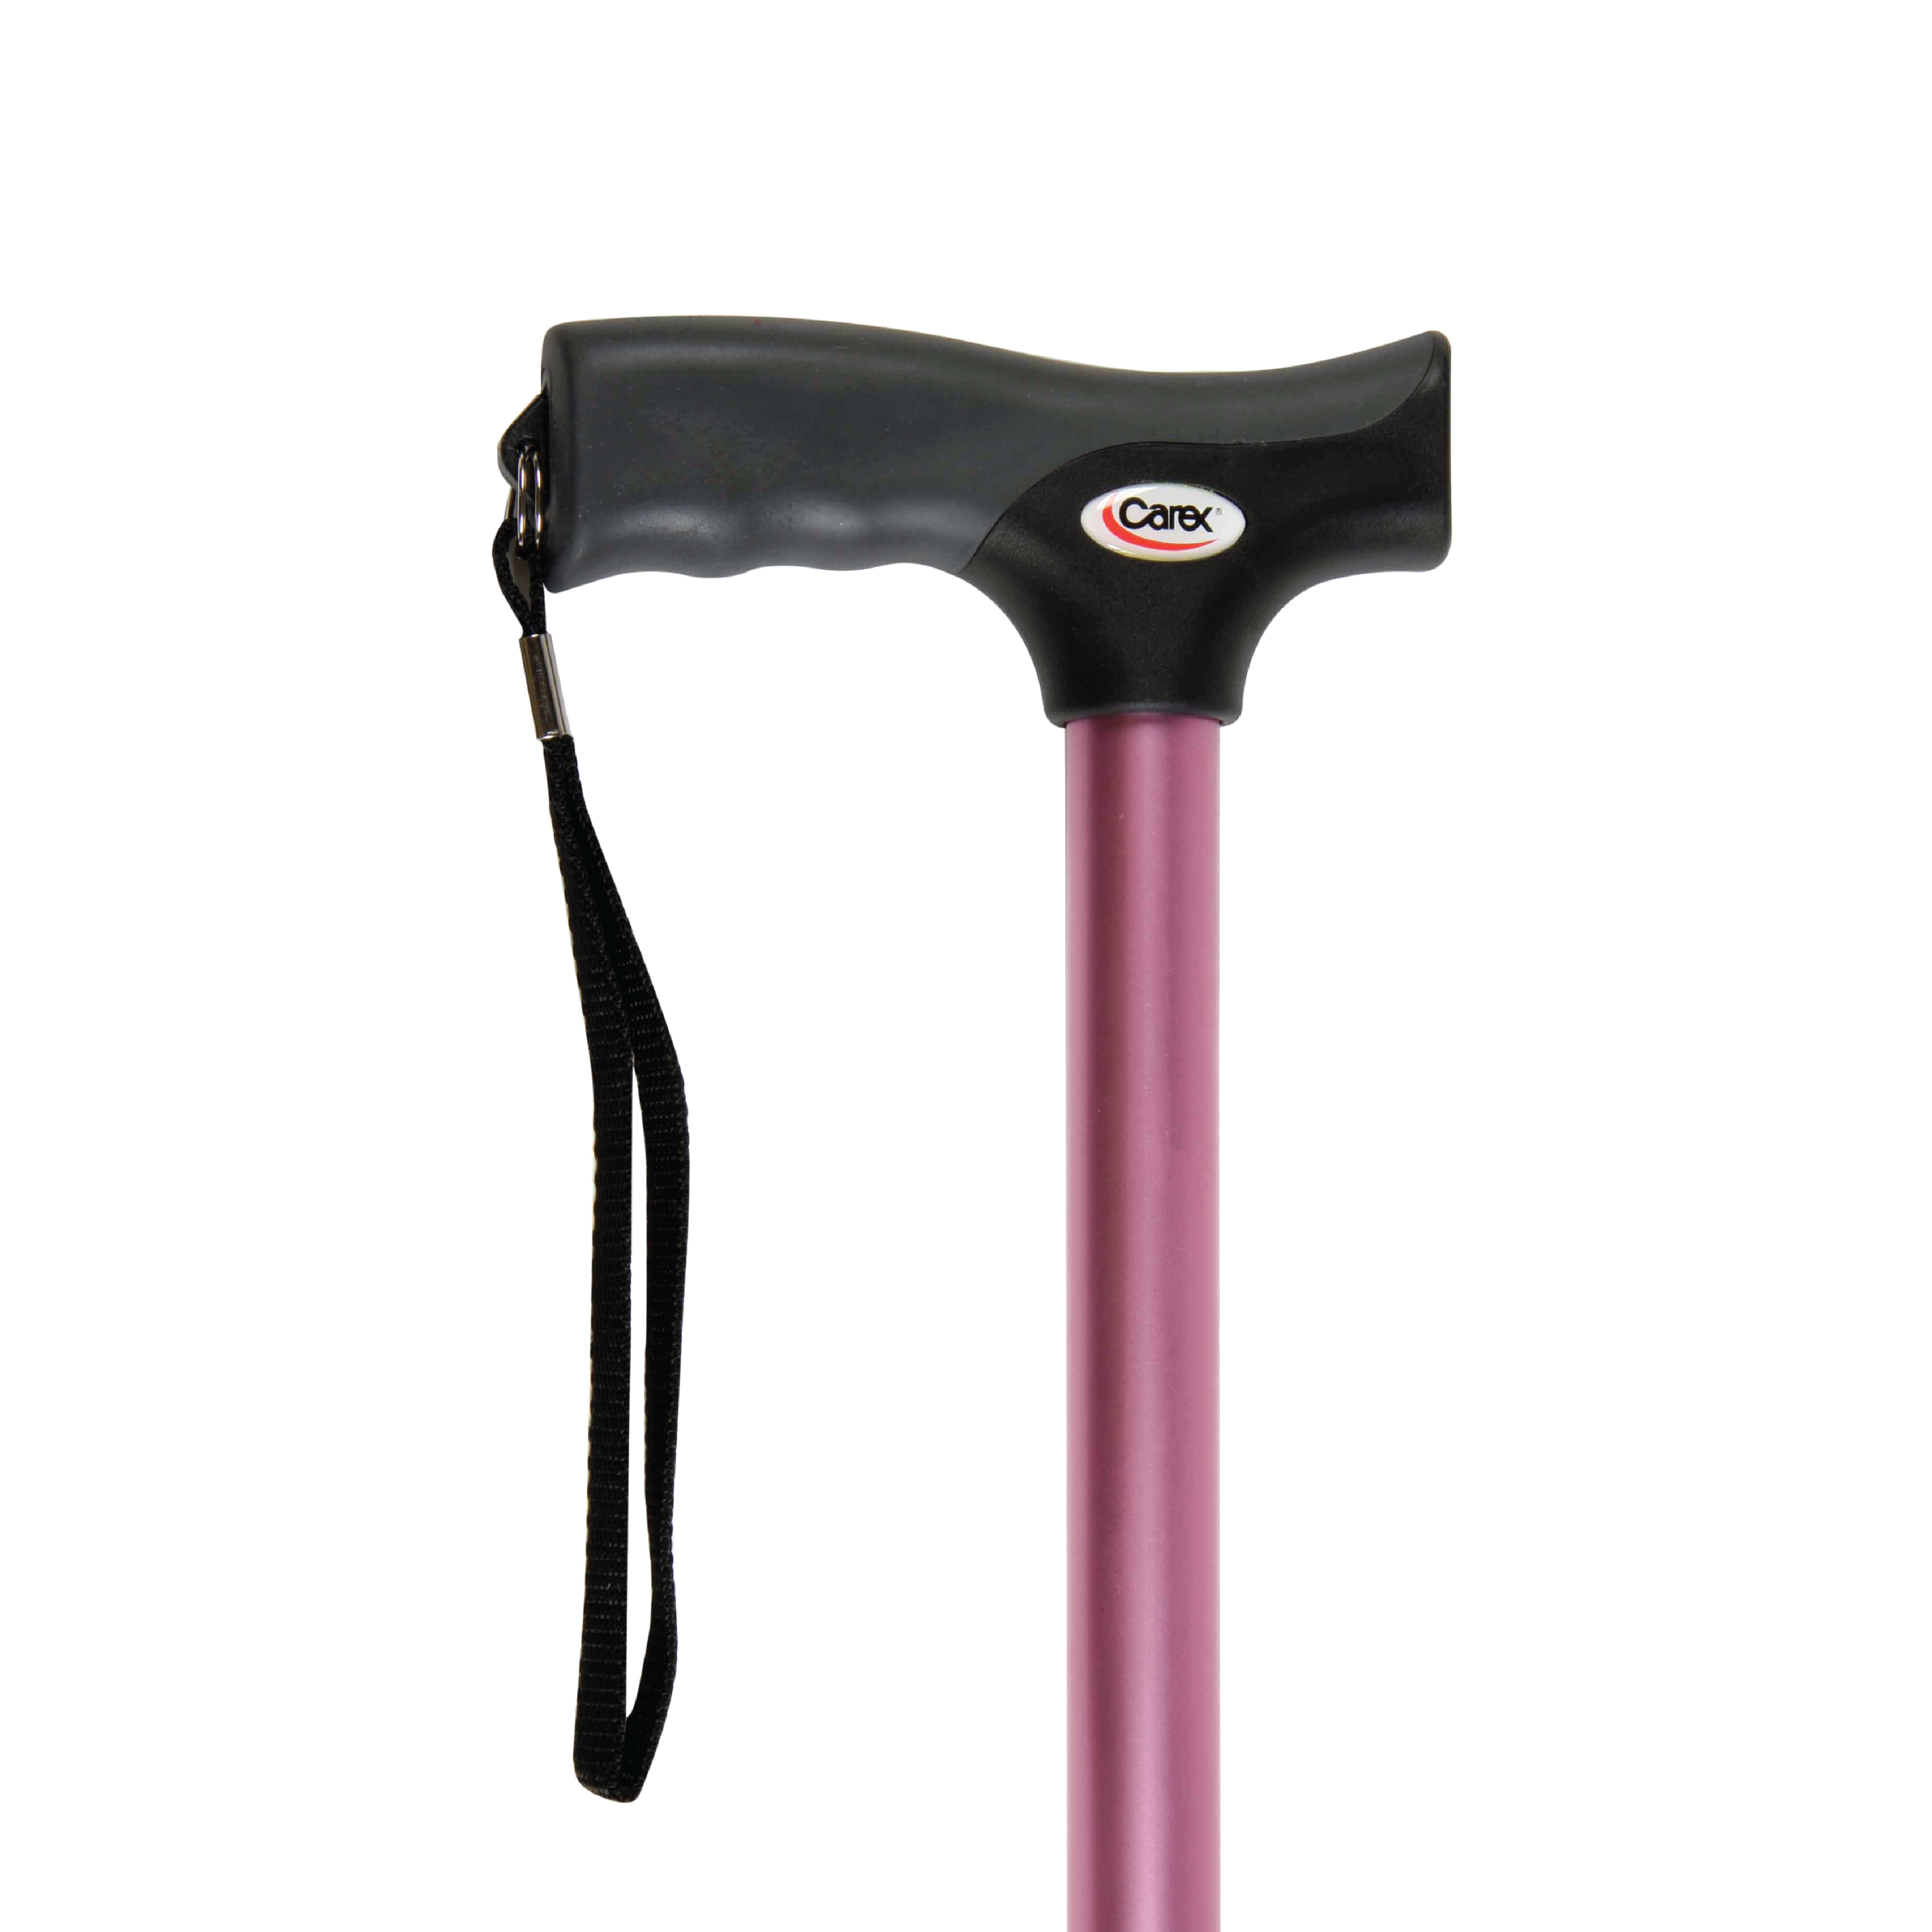 Carex Soft Grip Derby Walking Cane for All Occasions, Adjustable, Pink, 250 lb - image 1 of 9